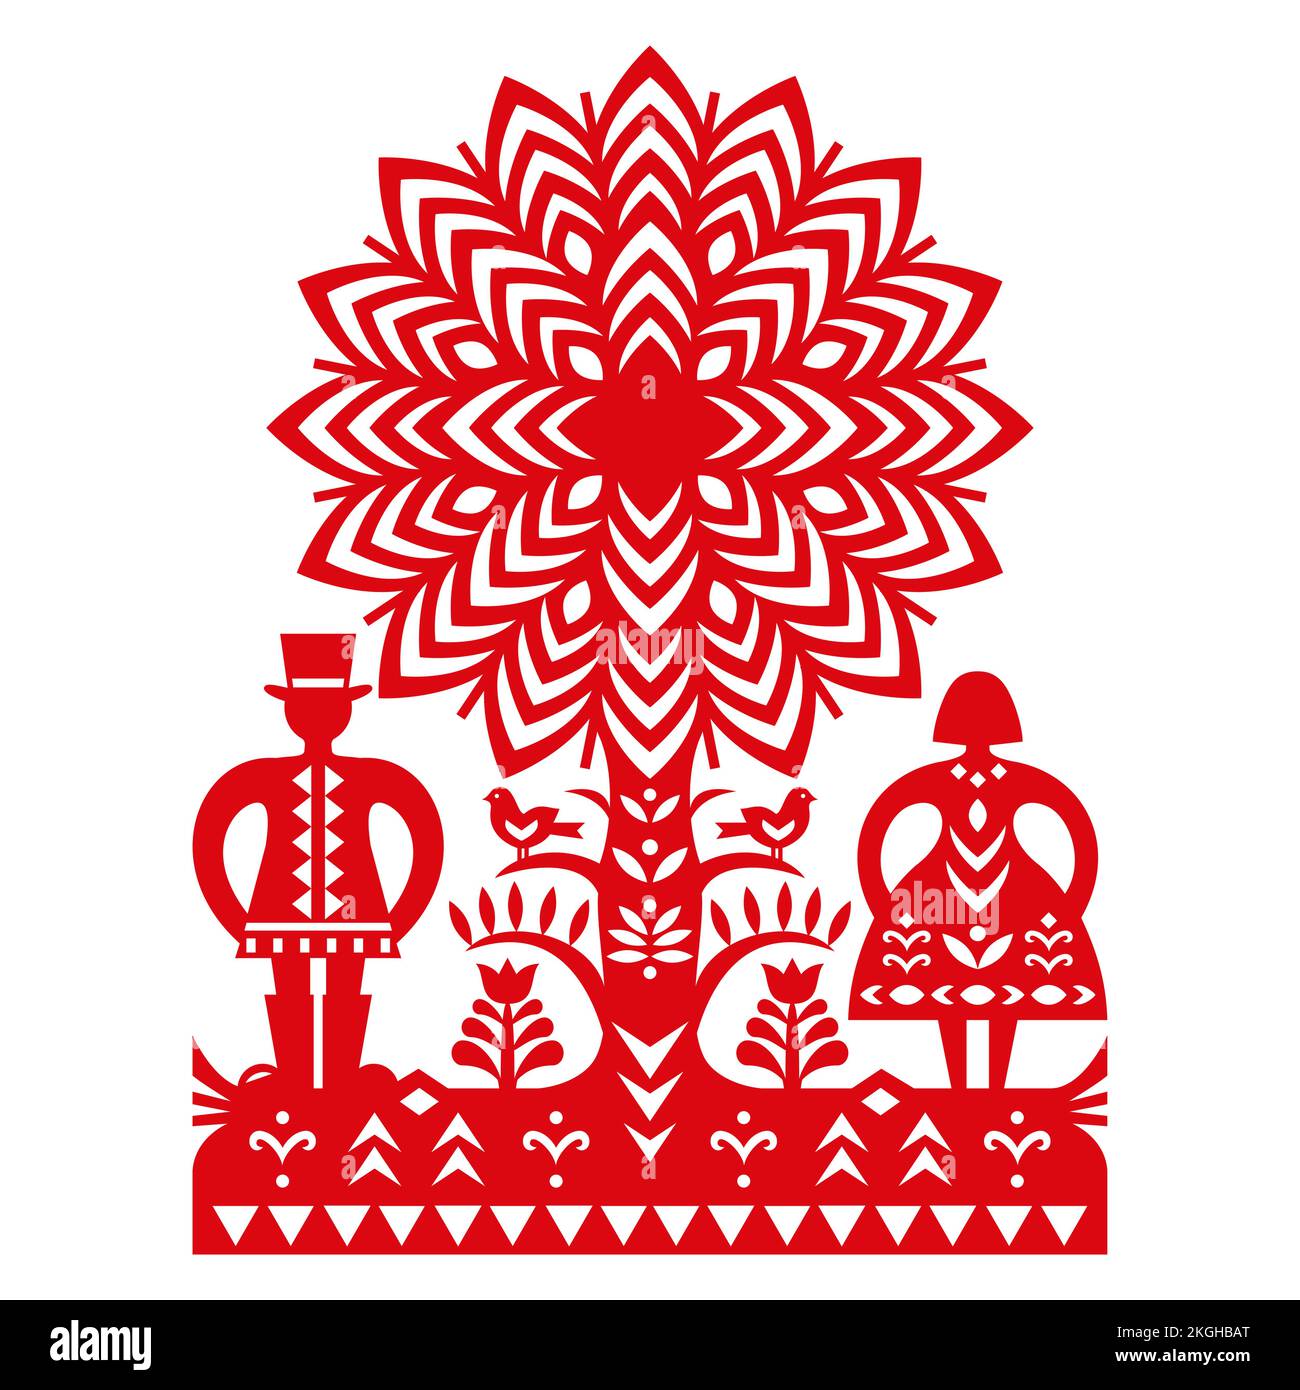 Polish folk art vector pattern with man in hat, woman and birds Kurpiowskie Leluje Wycinanki - Kurpie paper cut outs design in red Stock Vector